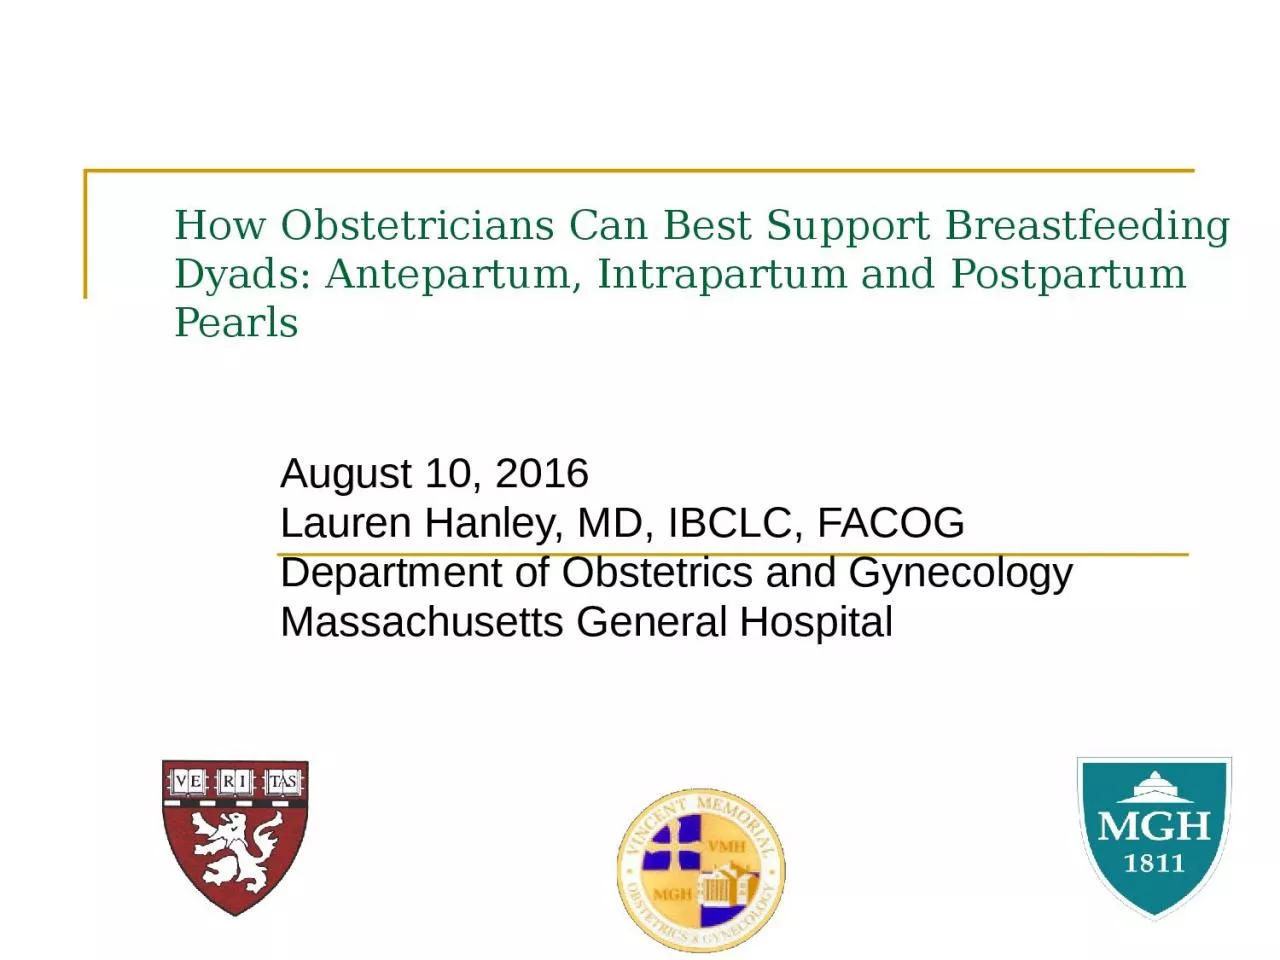 How Obstetricians Can Best Support Breastfeeding Dyads: